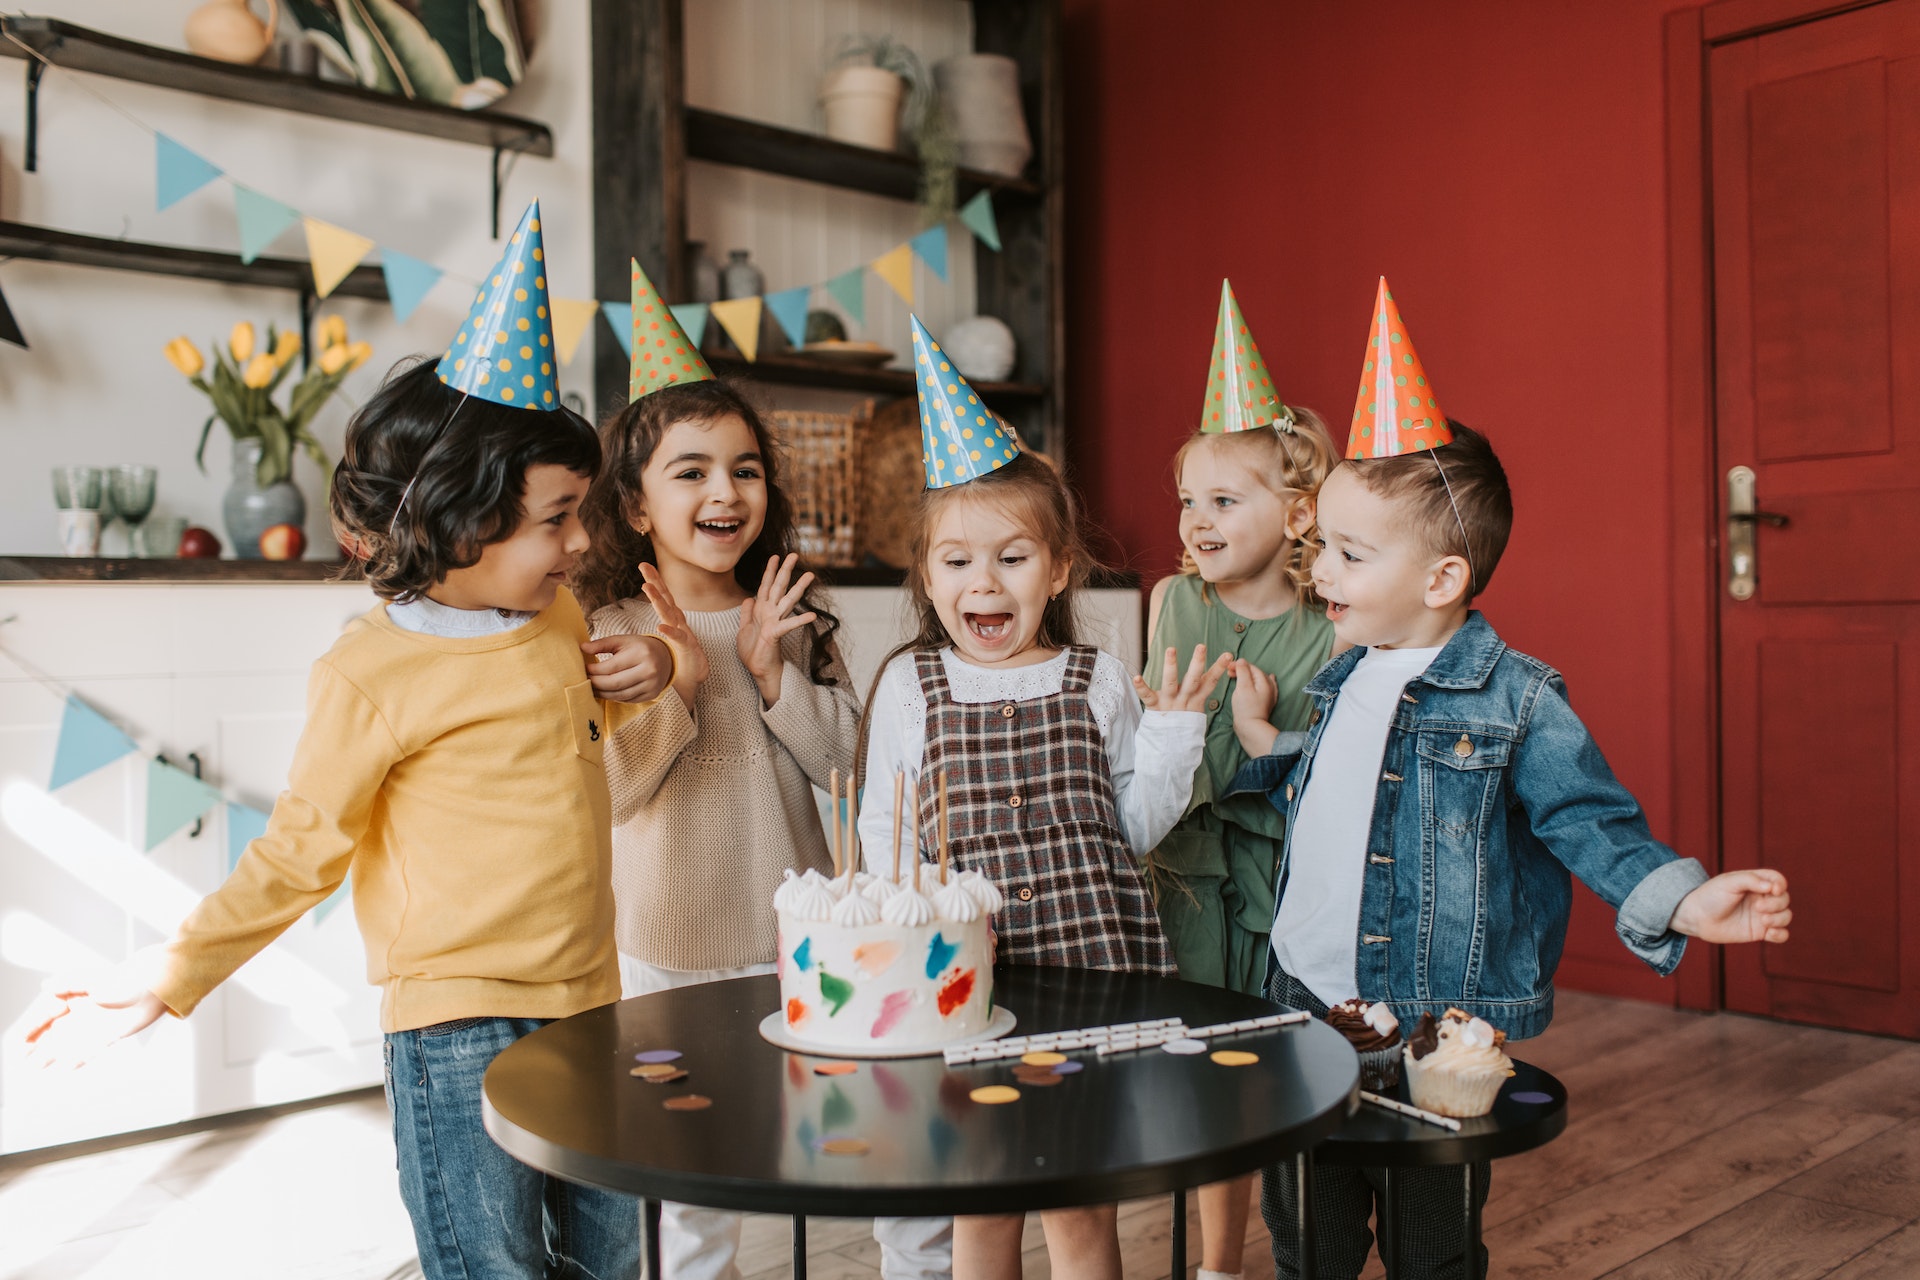 How to make party favors: a children's birthday party guide